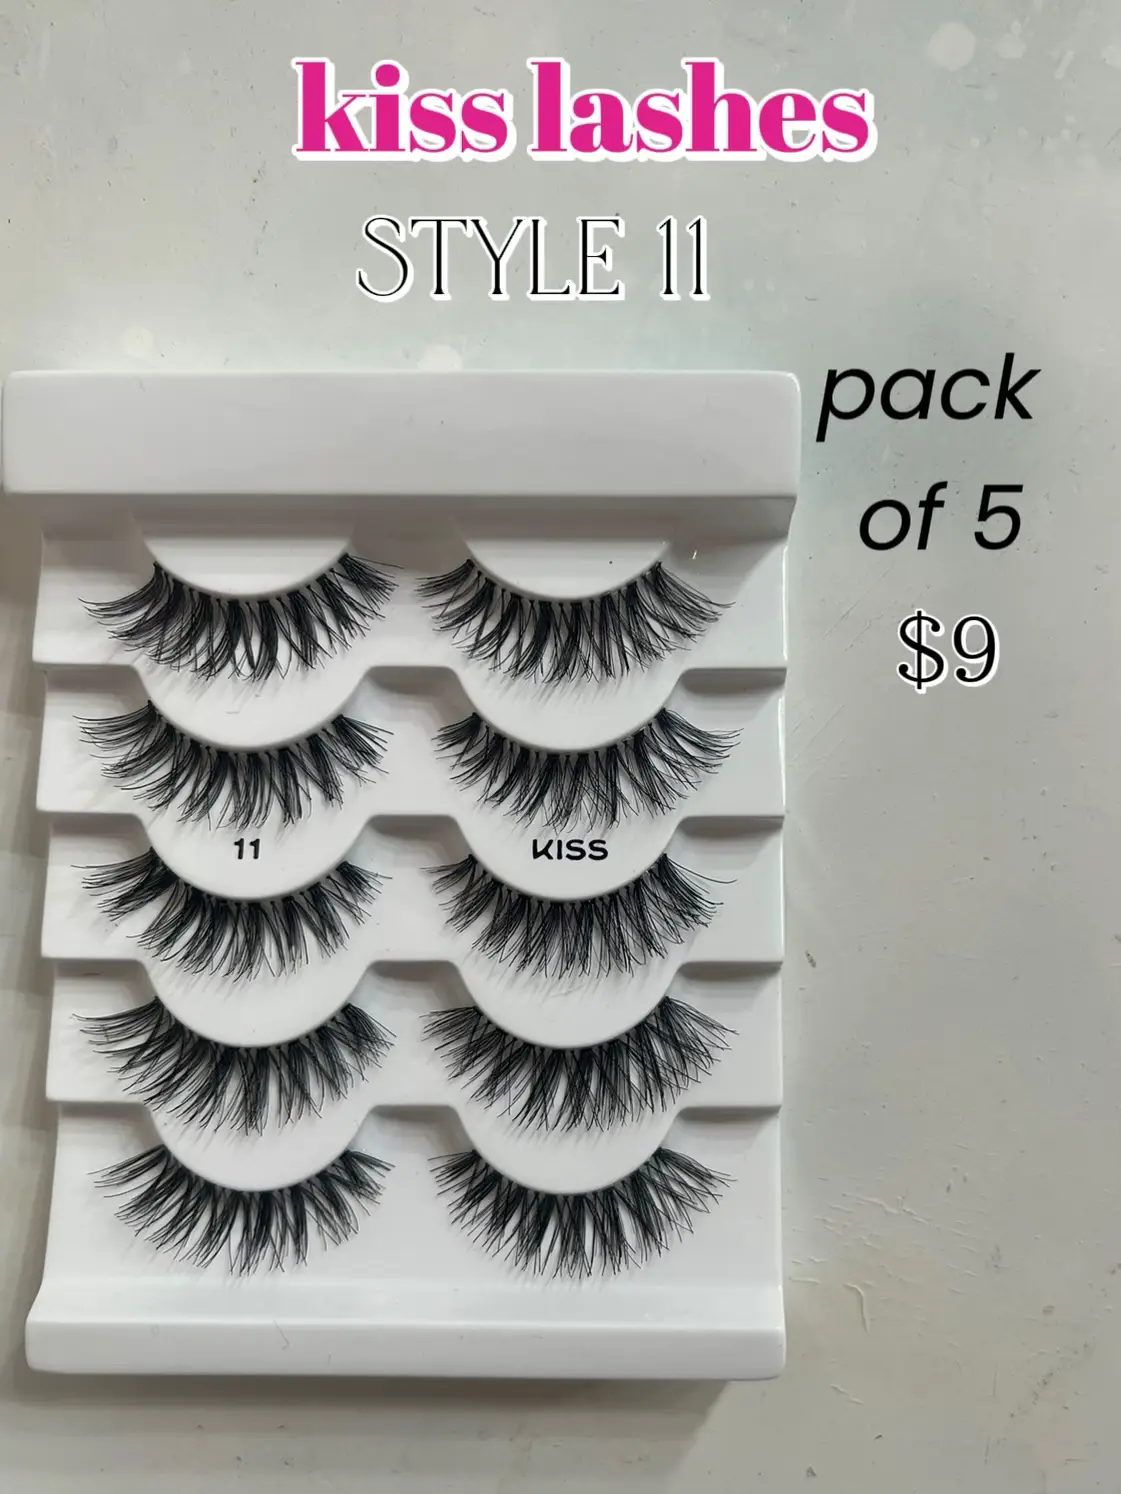  A pack of 5 white lashes with a price of $9.